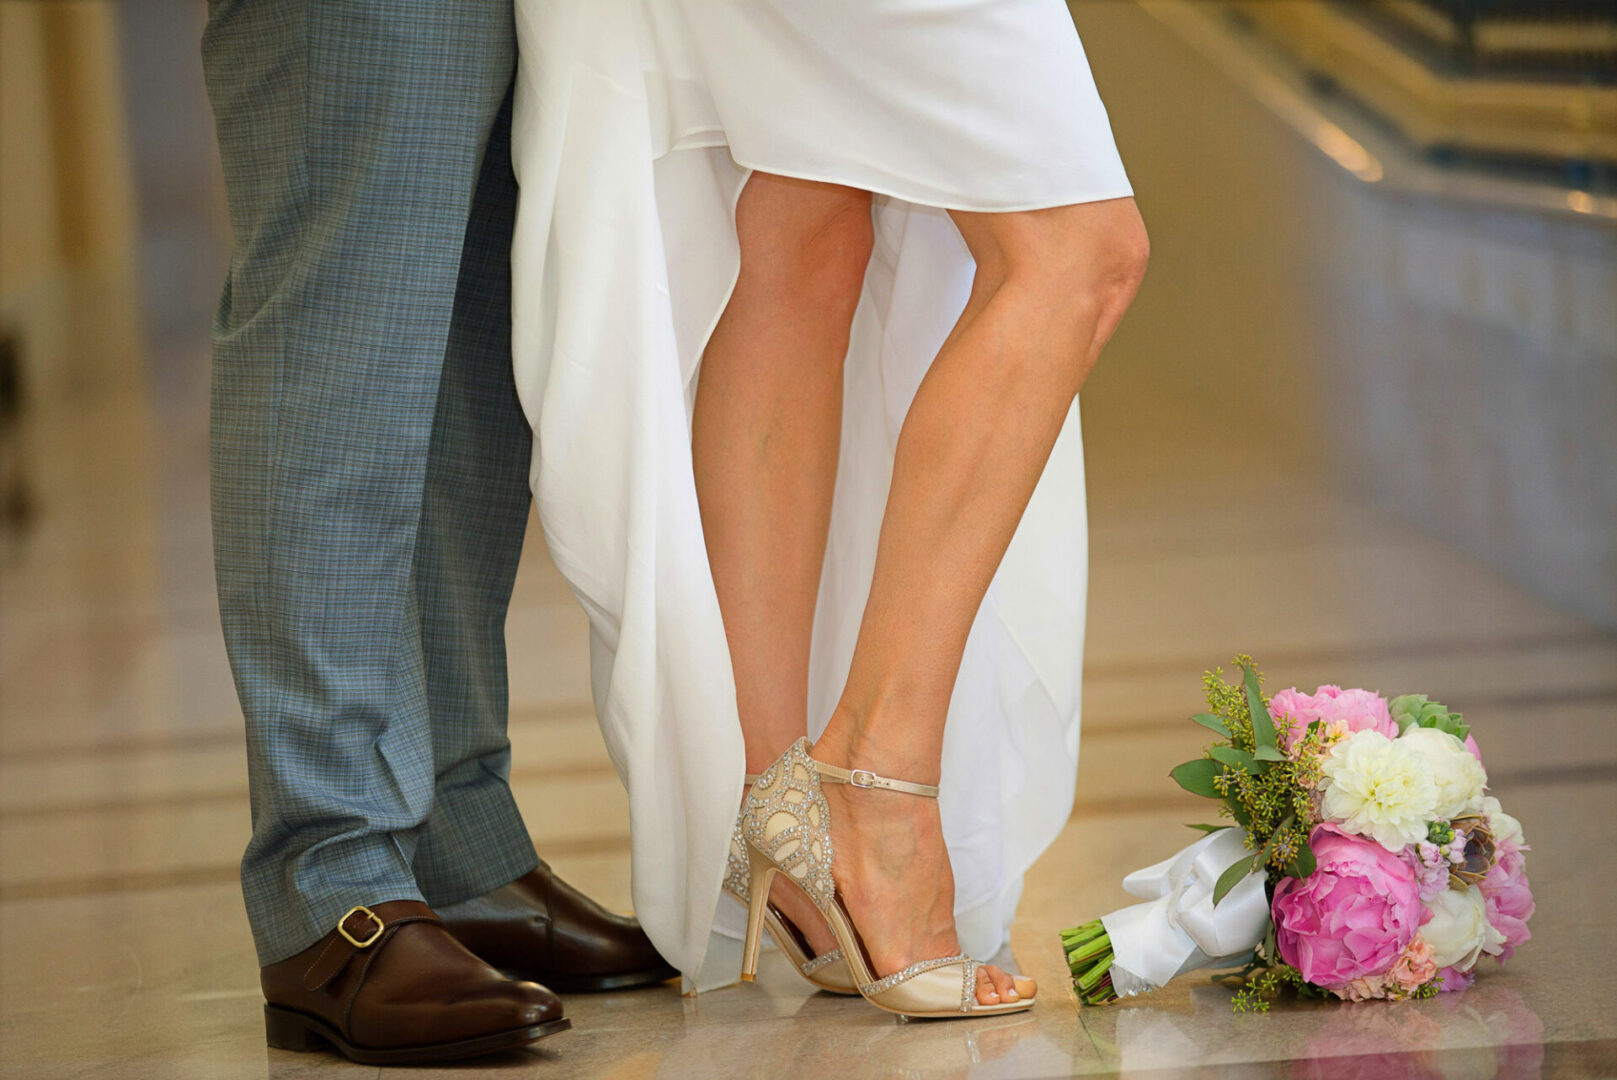 A newly married couple leg view